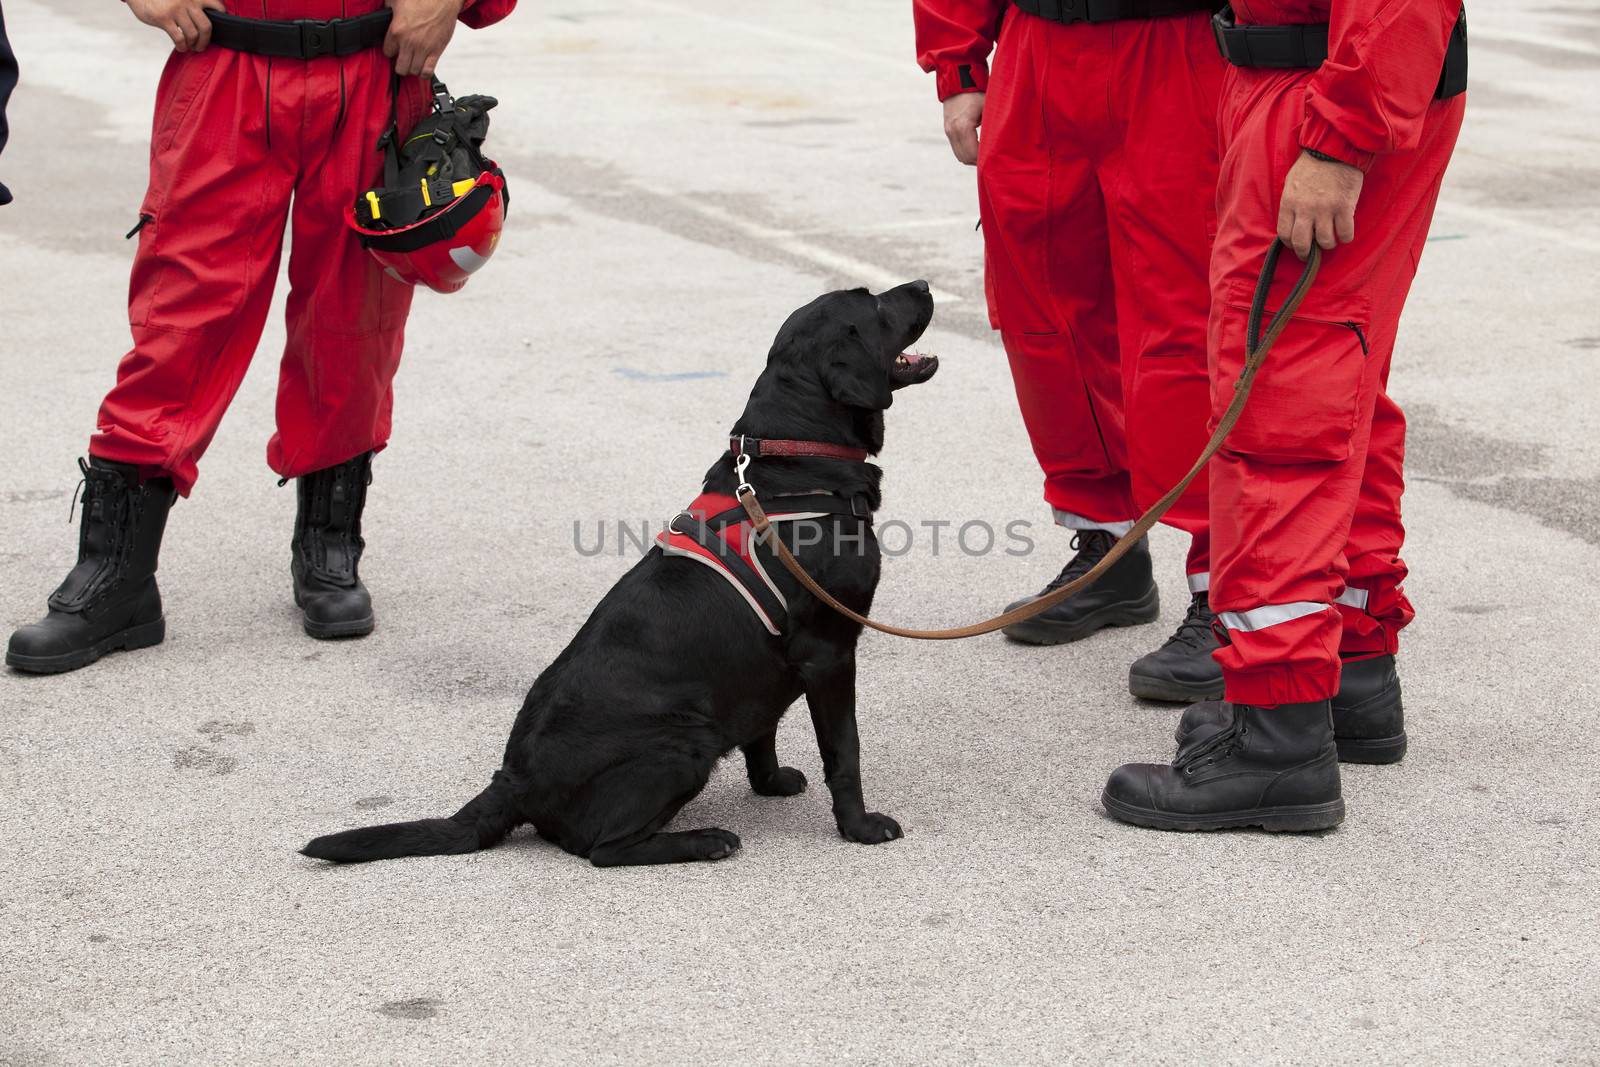 Rescue dog by wellphoto